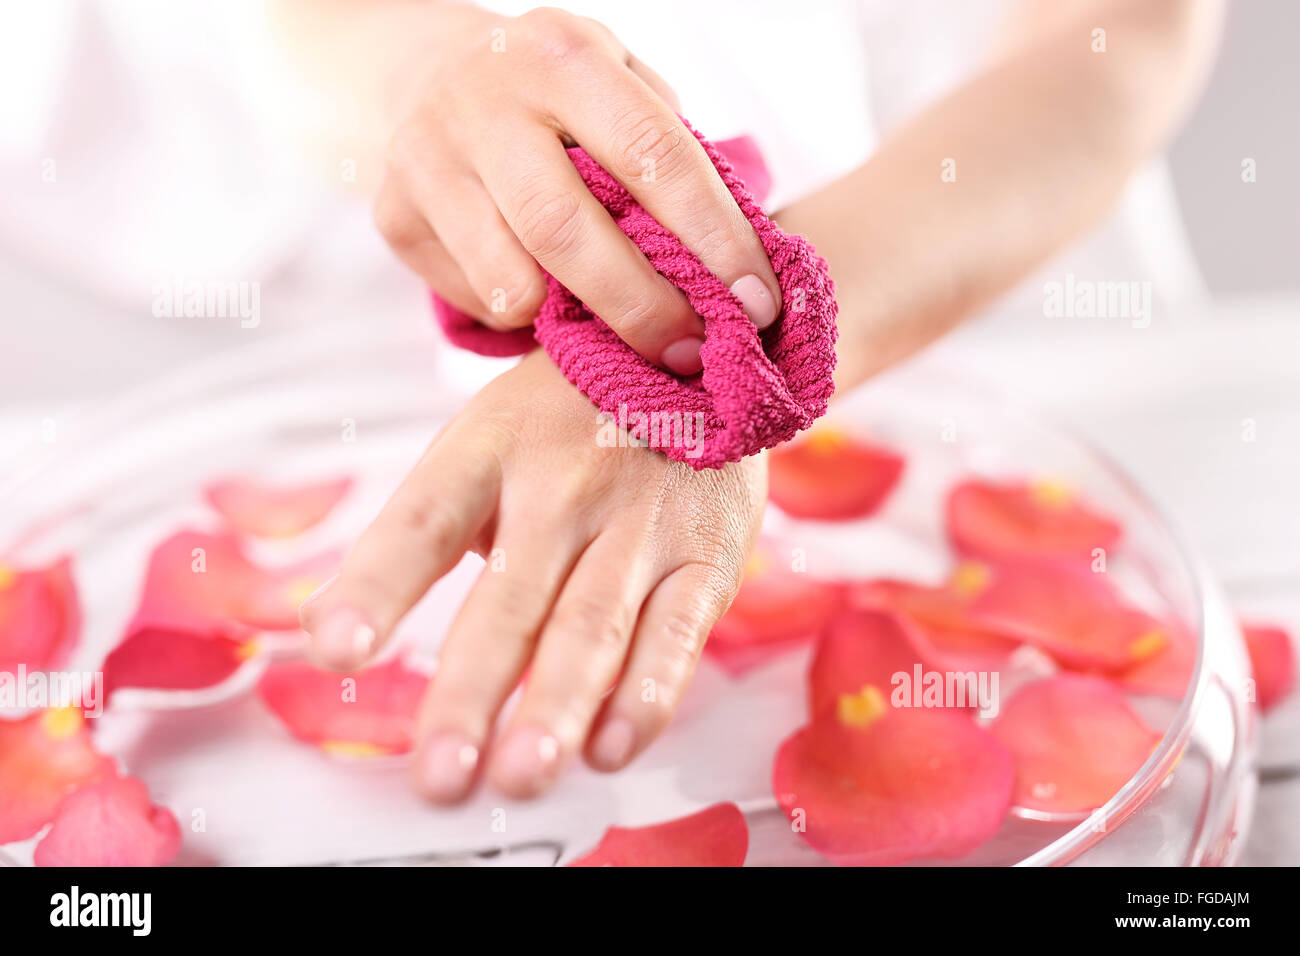 Care treatment of hands and nails woman hands over the bowl with rose petals. Hands women, rose bath nursing Stock Photo